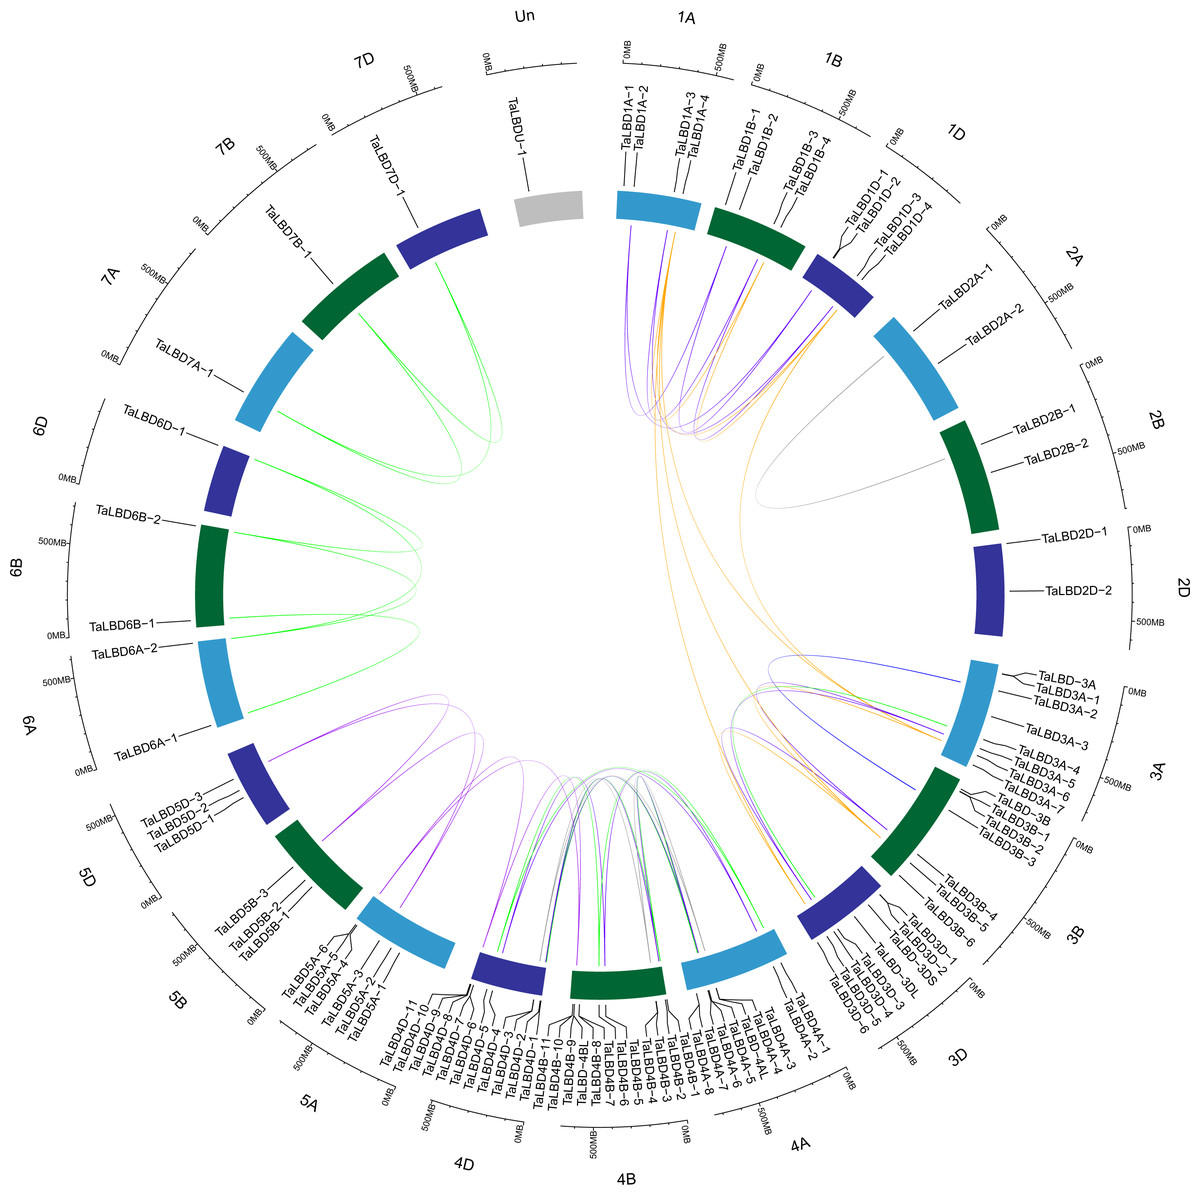 Genome-wide identification and characterization of the Lateral 